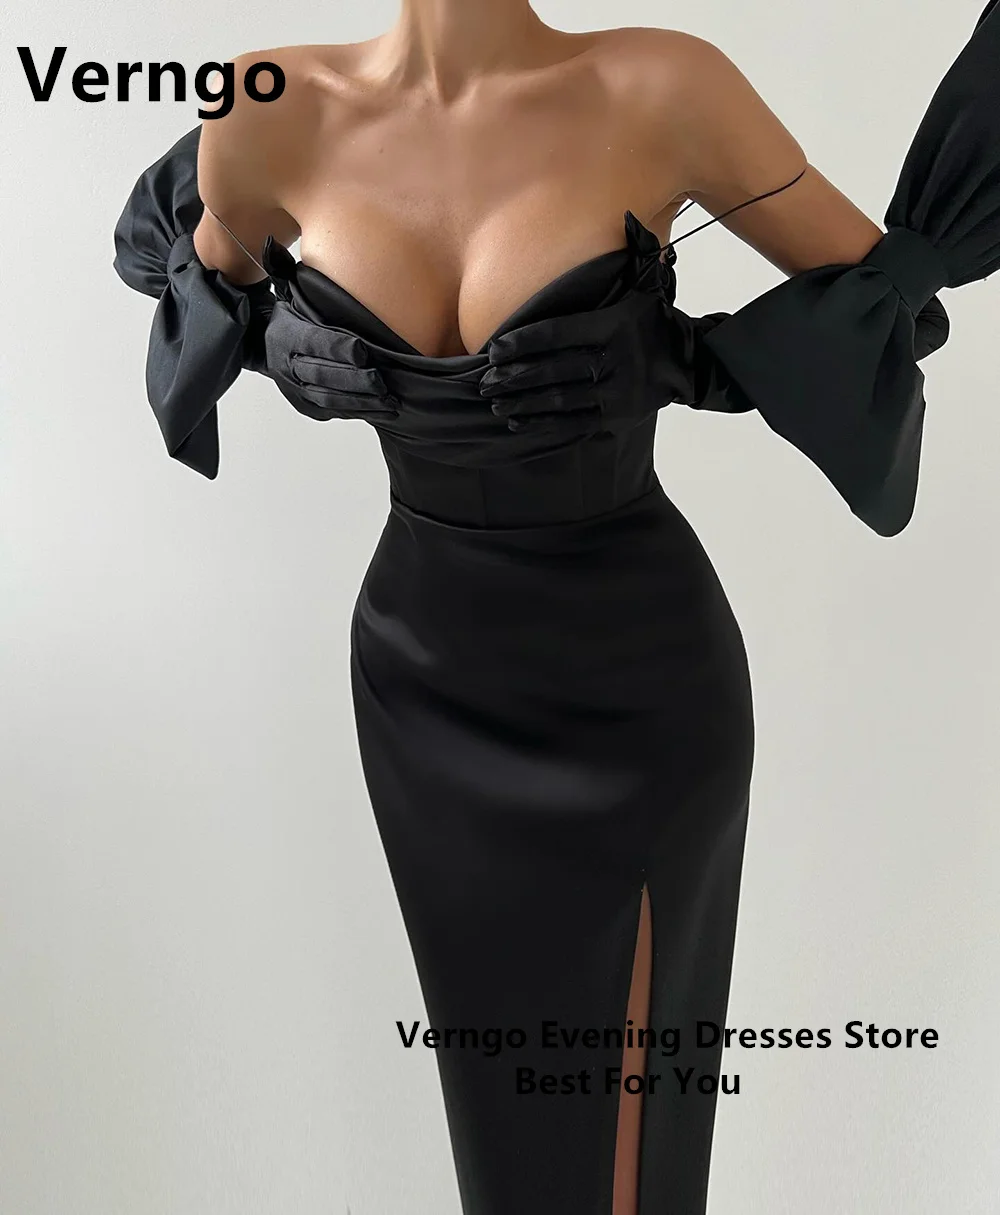 

Verngo Black Satin Party Dress For Women Sweetheart Mermaid Prom Gowns Sexy Side Slit Evening Dress With Gloves